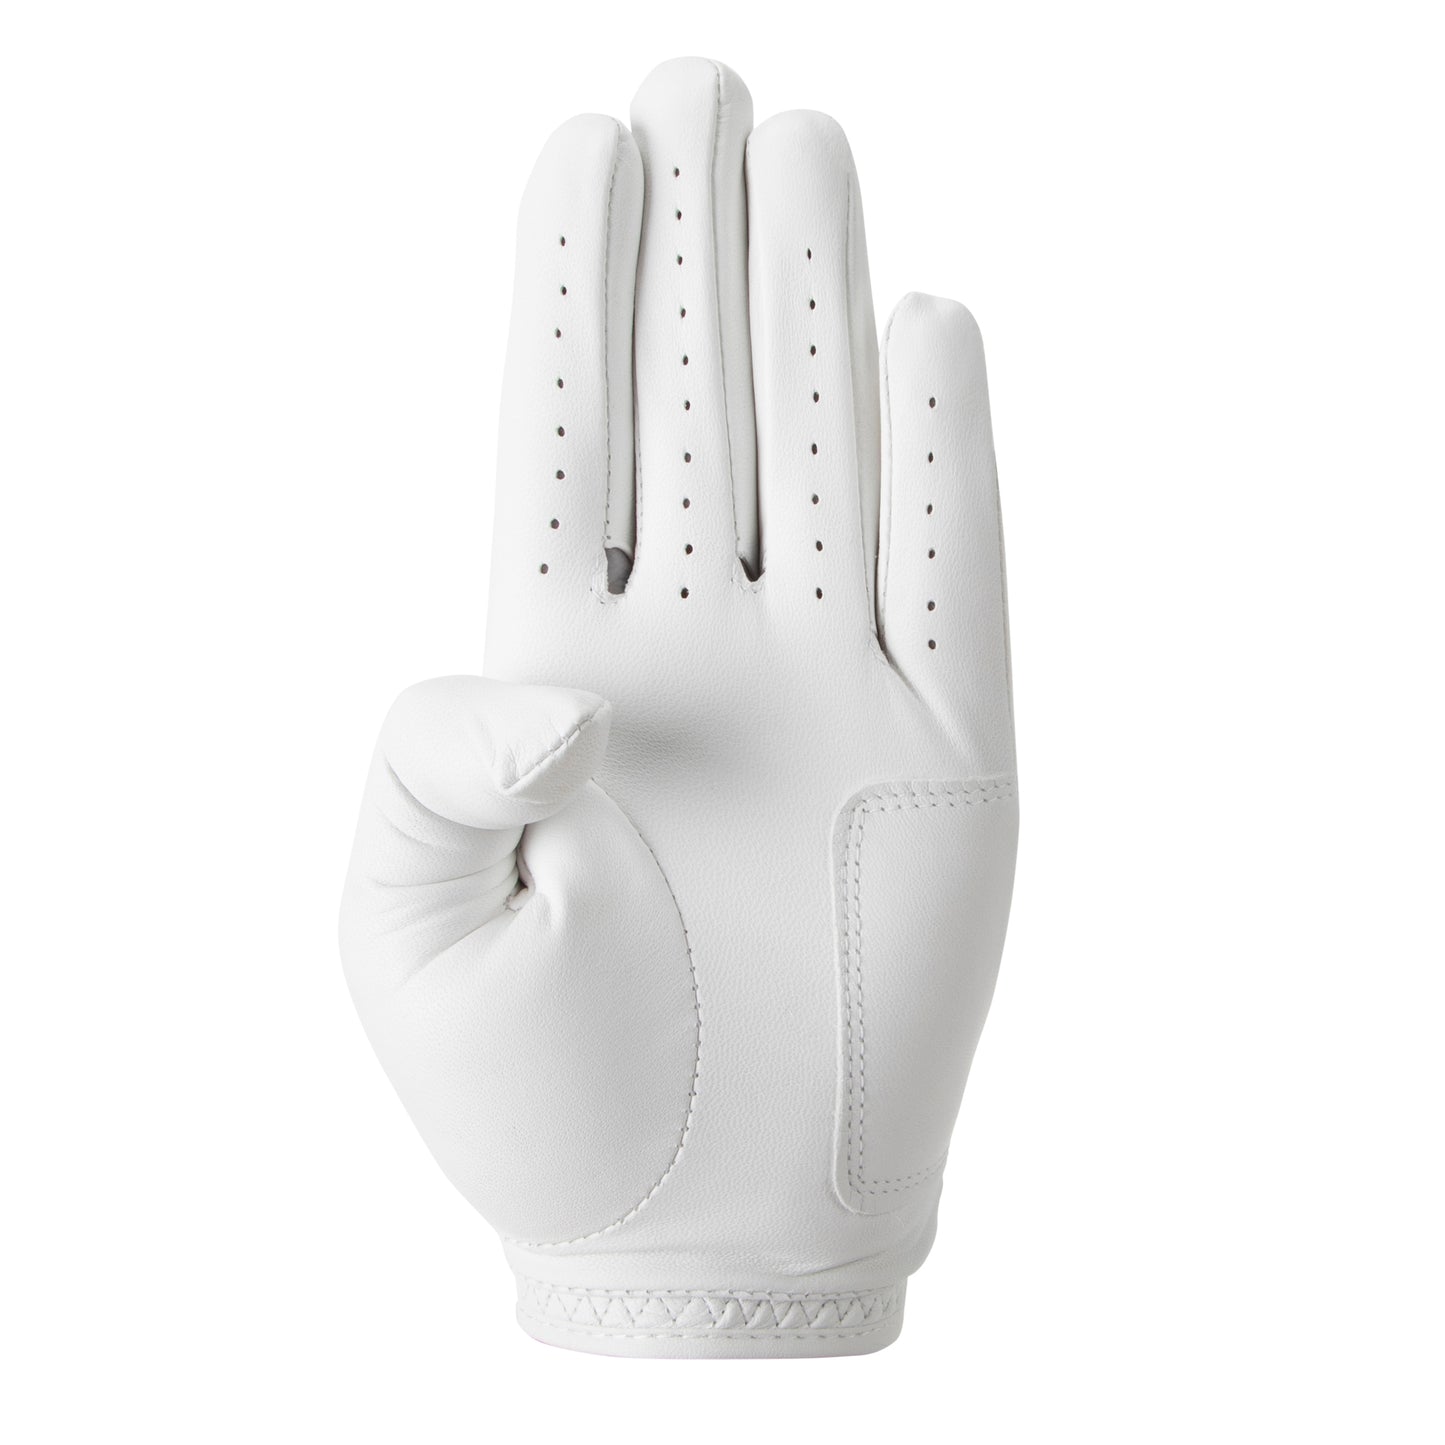 Premium Cabretta Leather Golf Glove with Durable Palm Patch from A.M. Golf Apparel